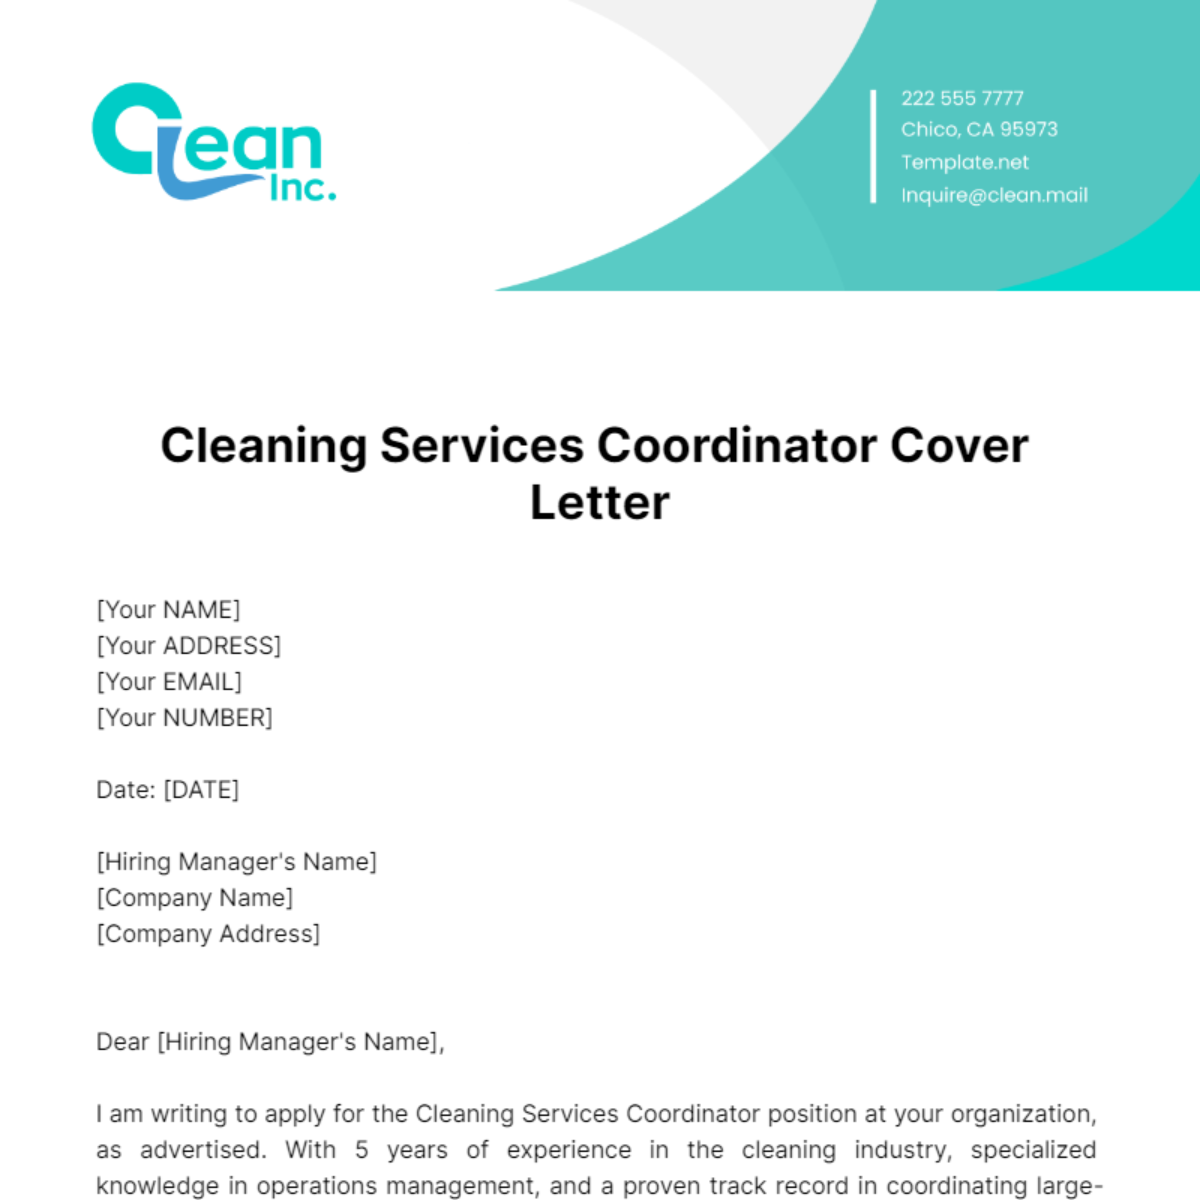 Cleaning Services Coordinator Cover Letter Template